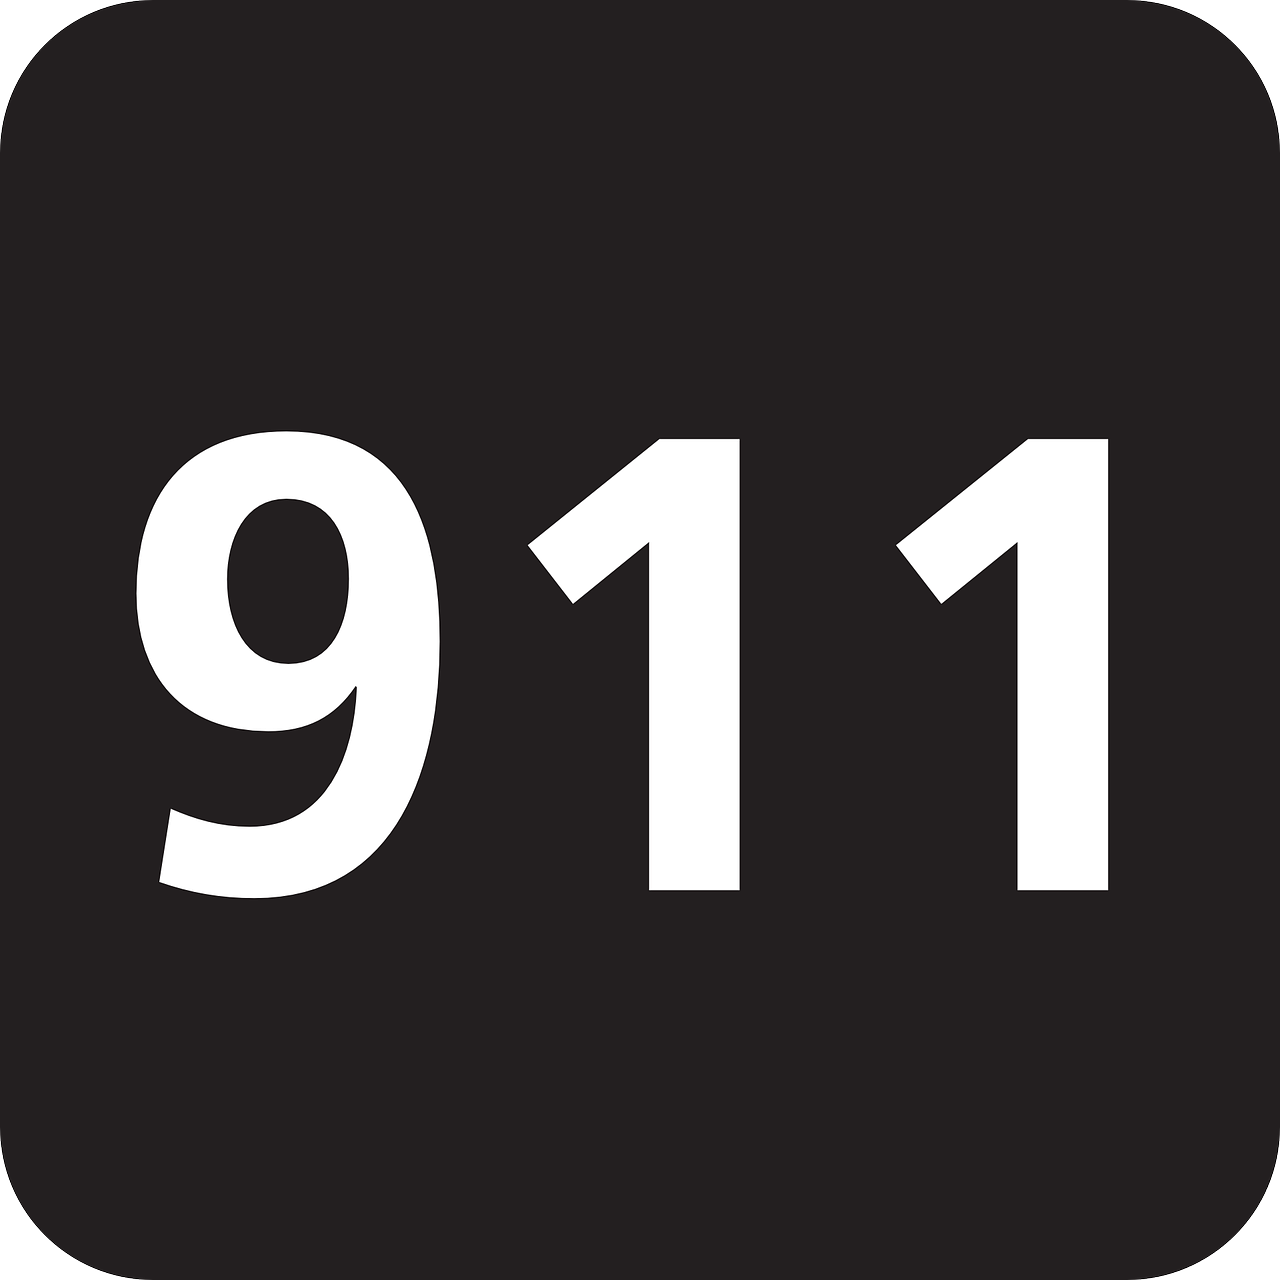 People dial 911 when there is a life threatening crisis.&nbsp; In t...